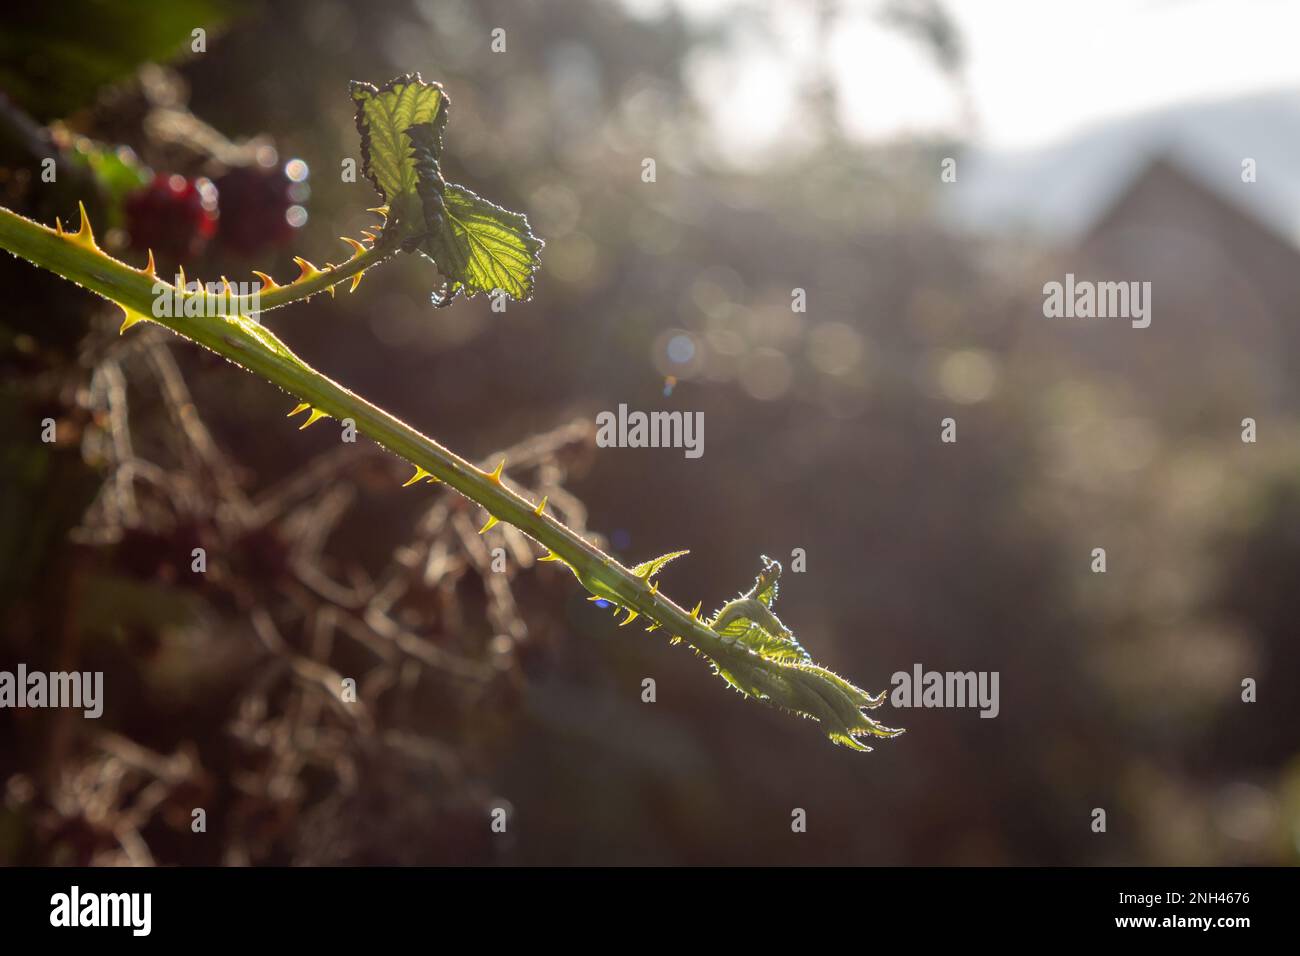 A new green stem covered in thorns and bud of a blackberry bush is backlit. Stock Photo